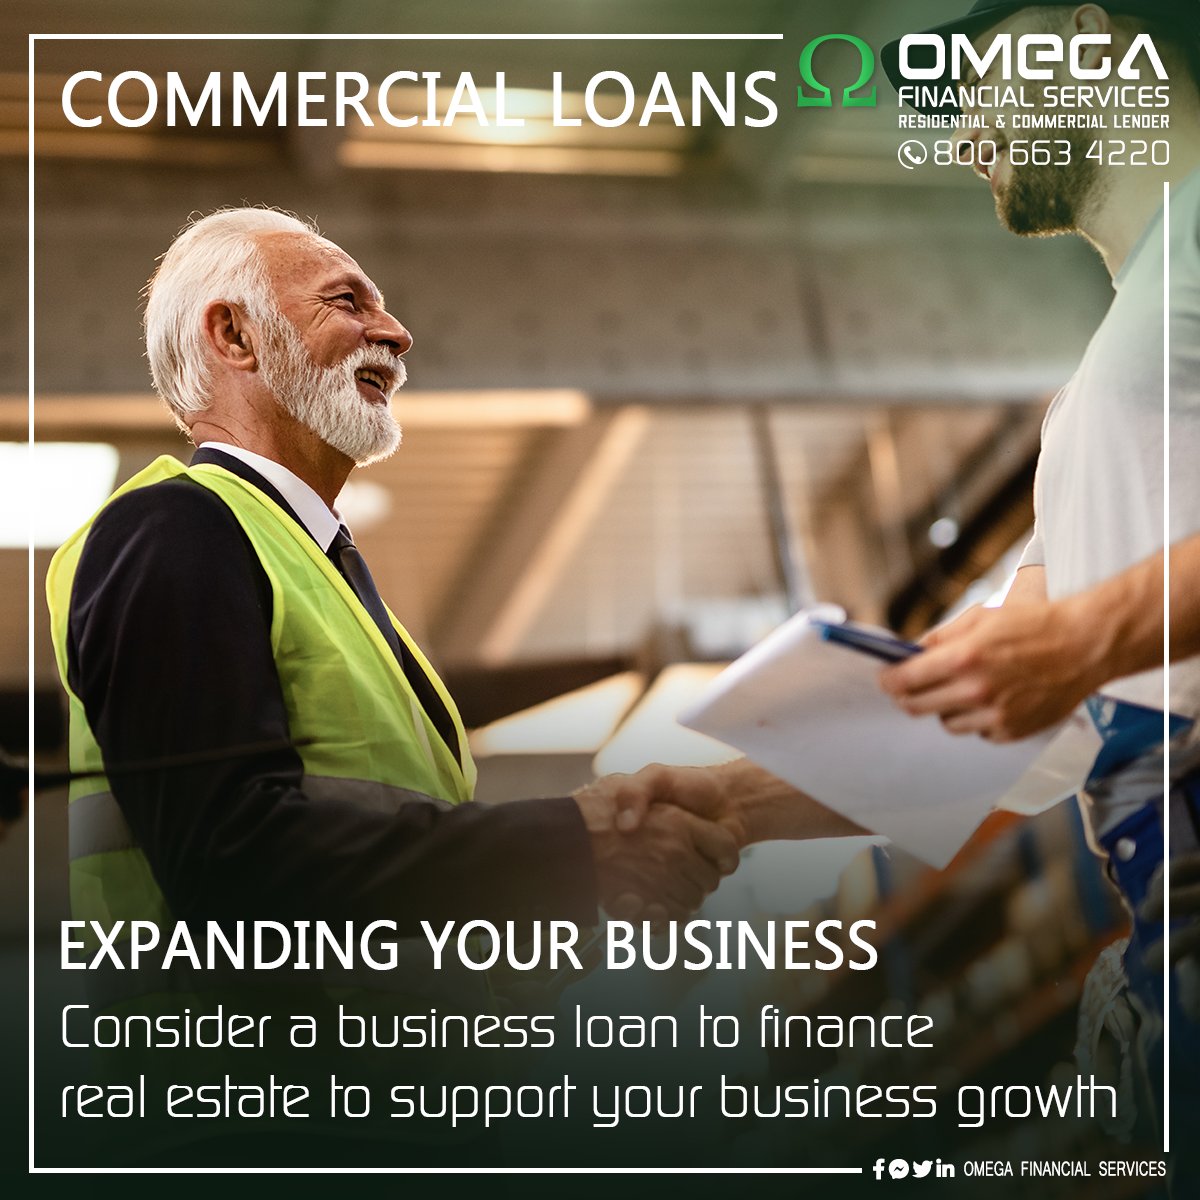 Omega Financial Services, Inc (@ofs_mortgage)